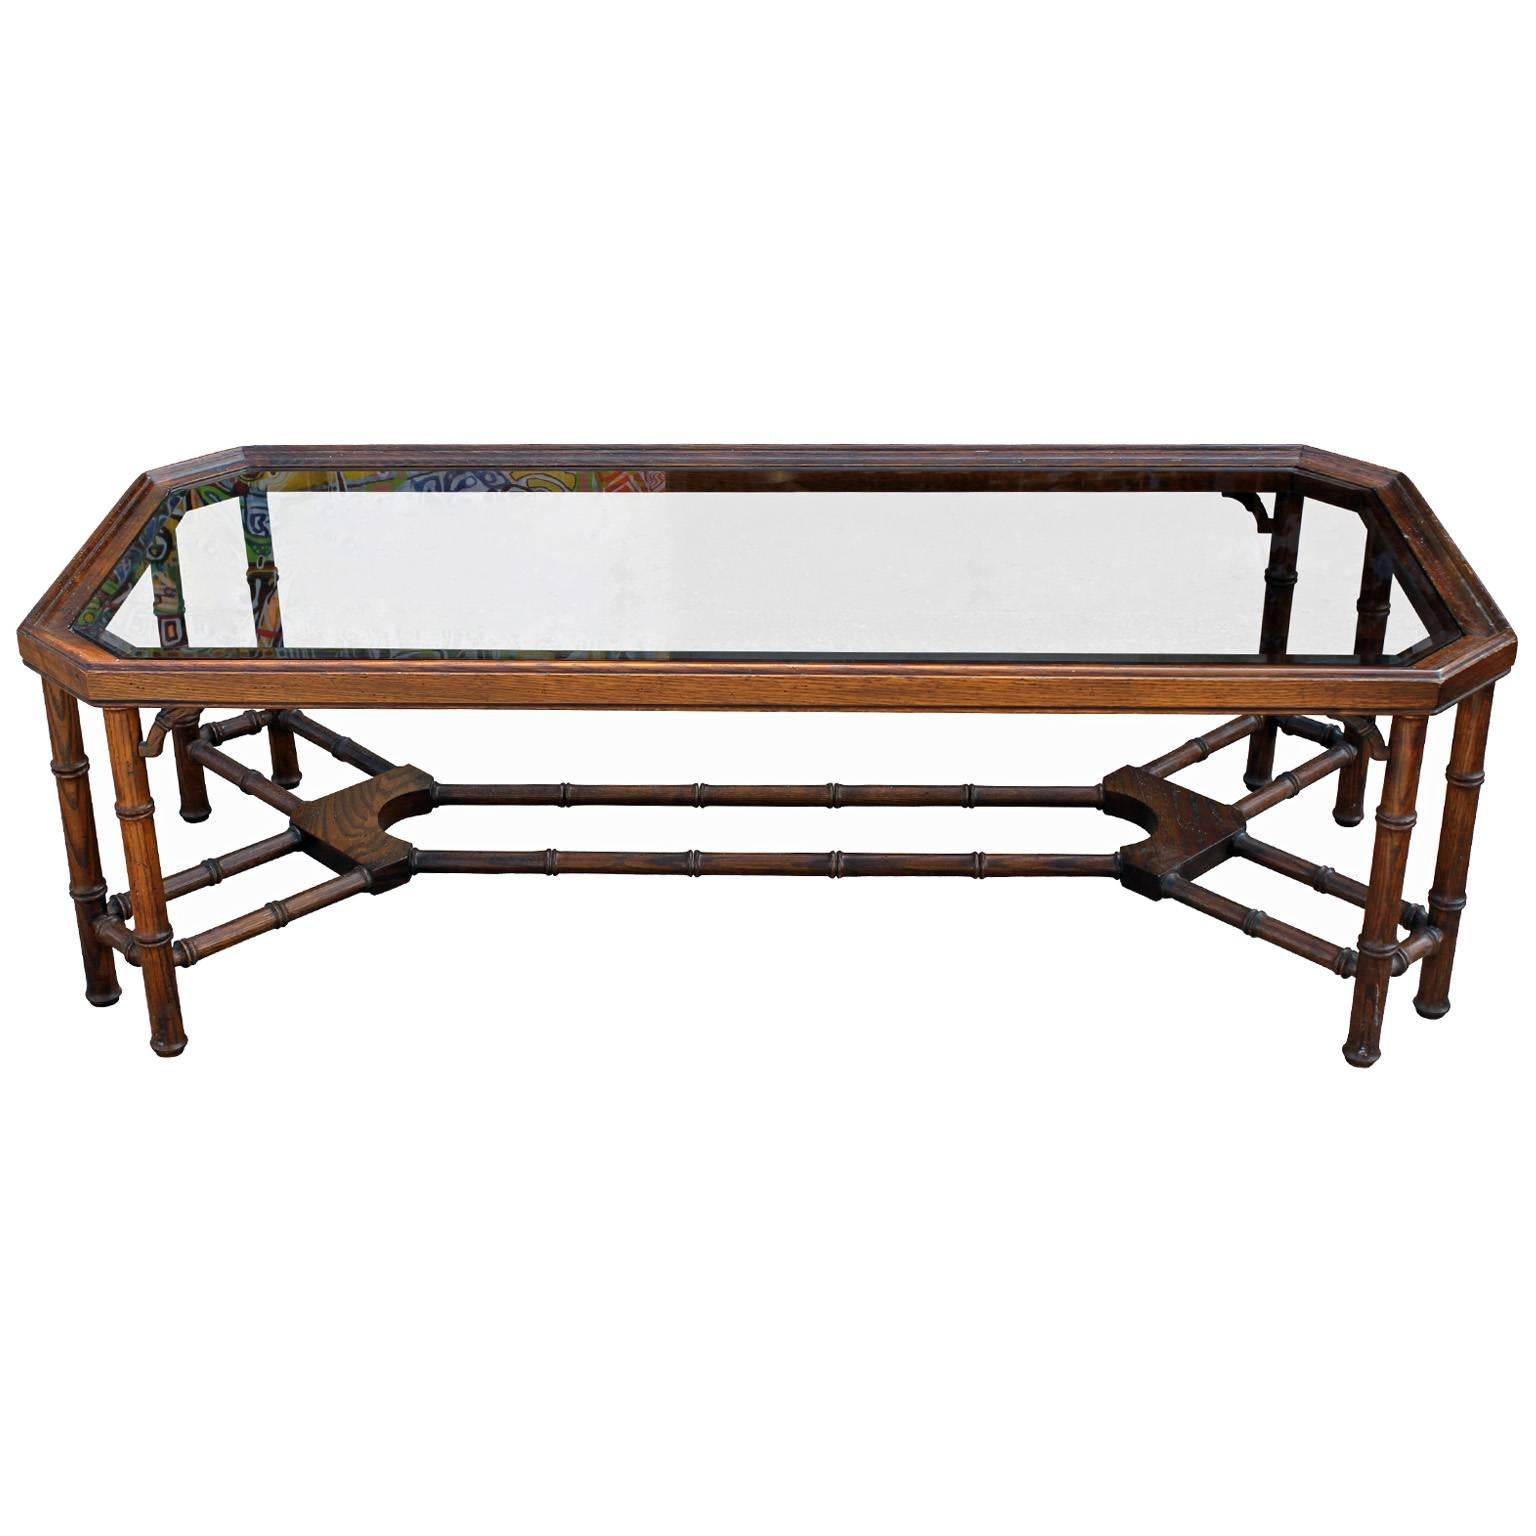 Great faux bamboo and glass walnut coffee table attributed to Baker Furniture. In excellent vintage condition.